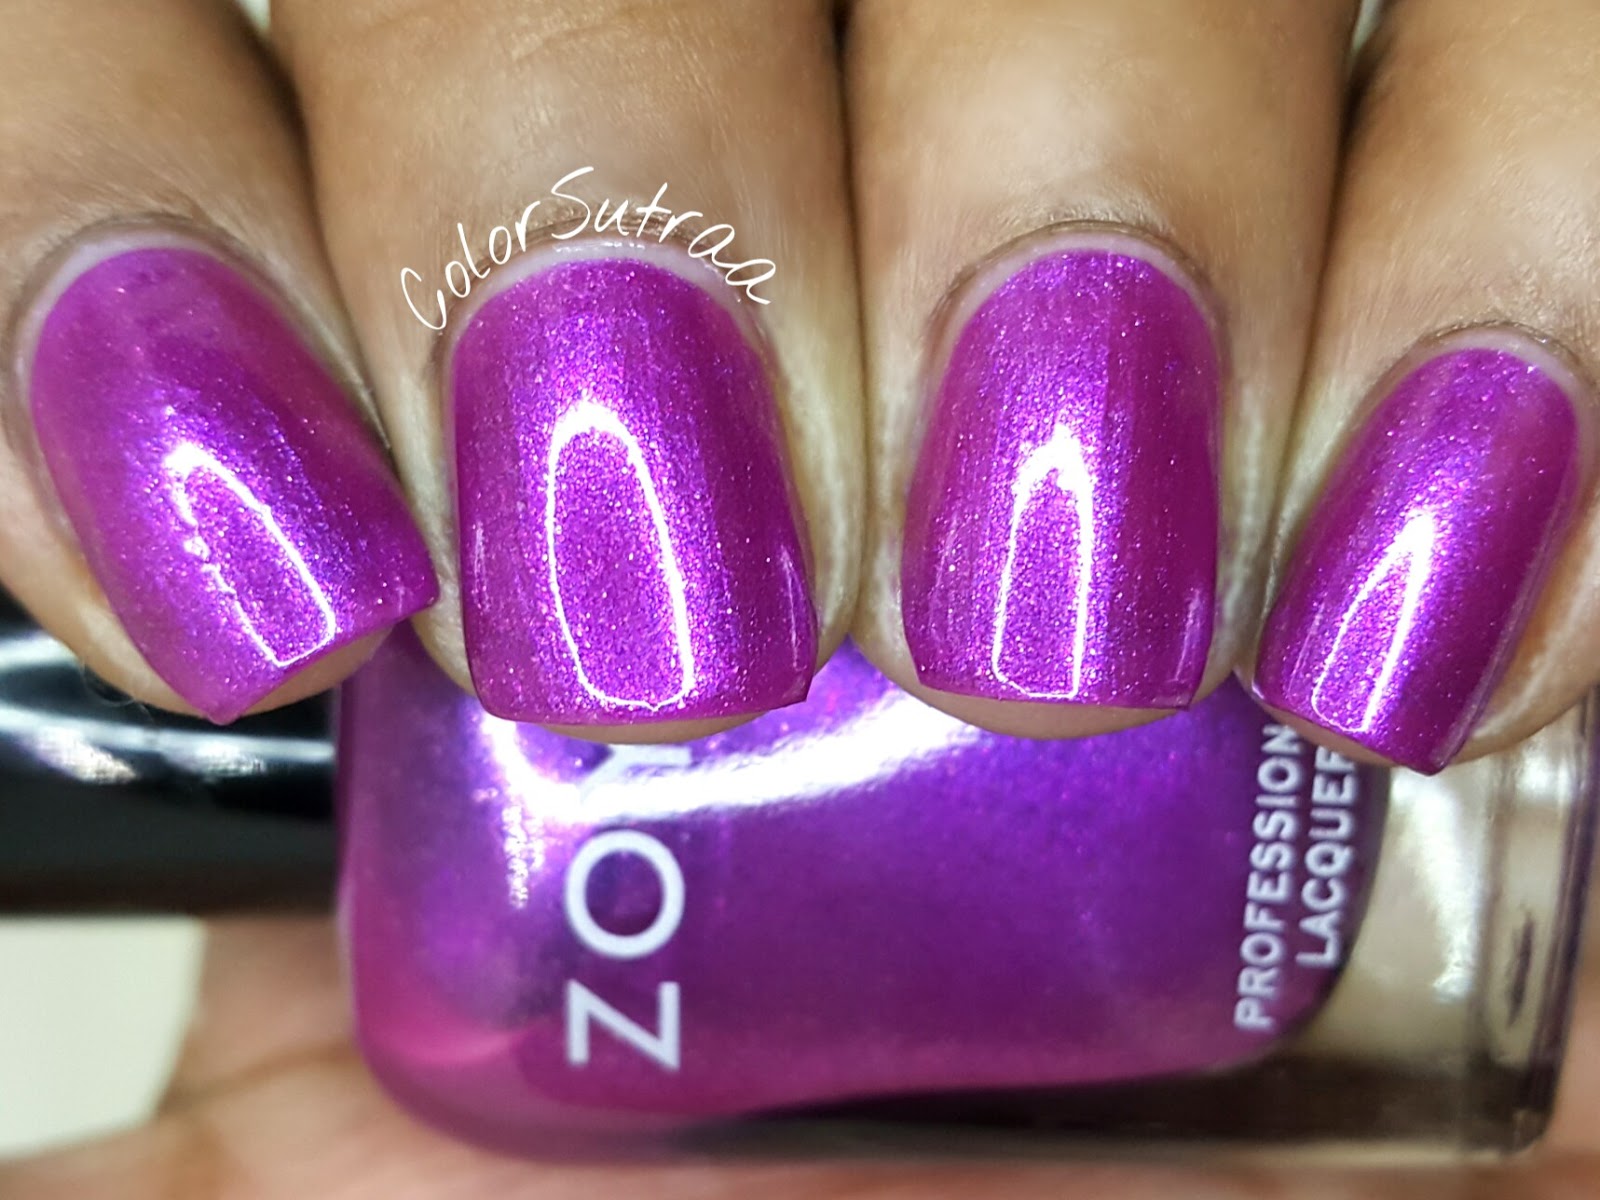 5. "Mood Boost" Nail Polish Collection by Zoya - wide 4